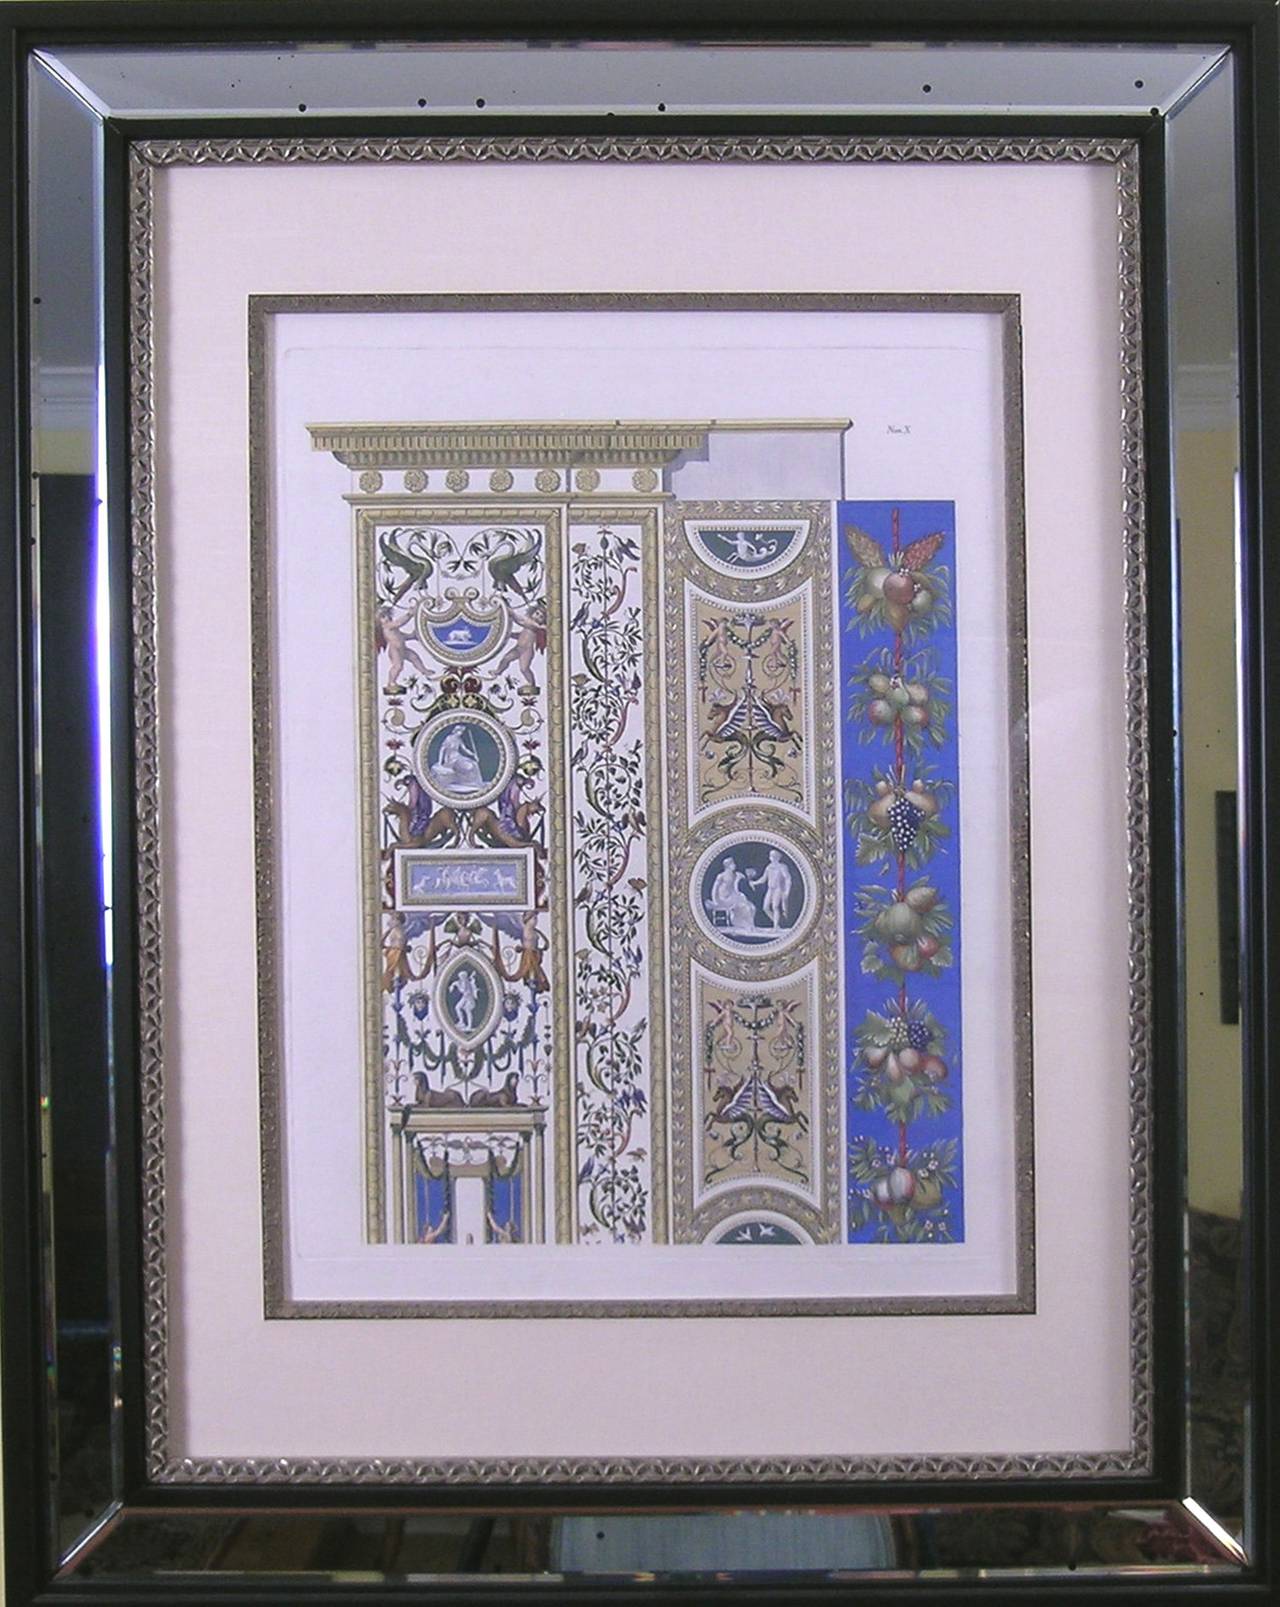 Raphael's Loggia  Plate X.  Pilaster Top  Priced as a pair with Pilaster  Bottom - Print by Gaetano Savorelli